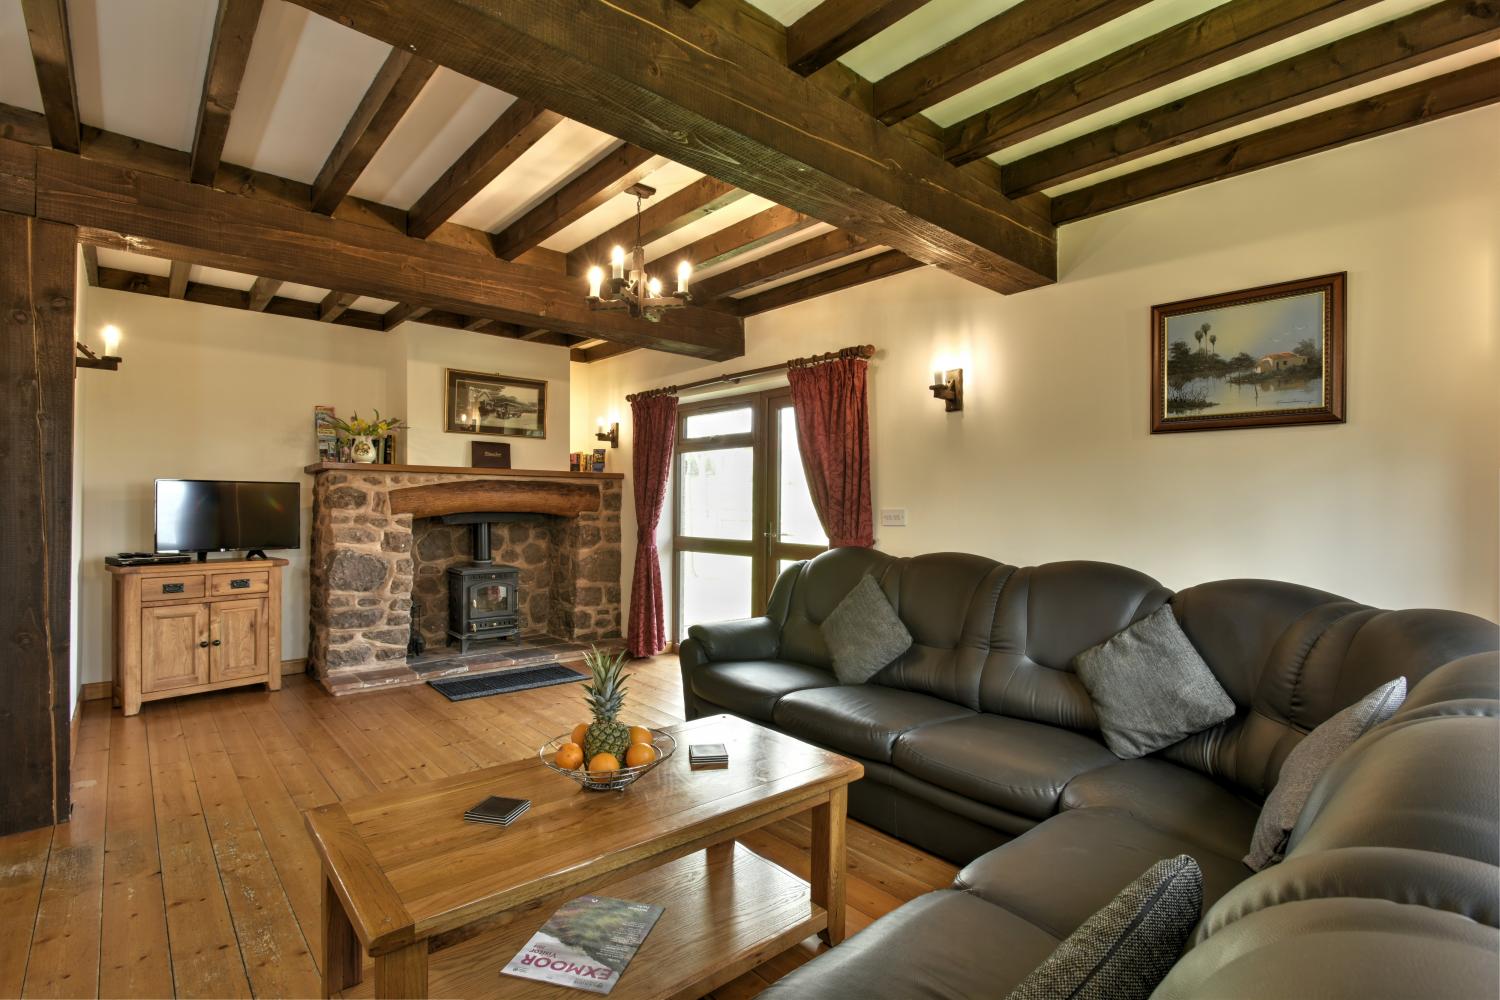 Lovely wood-burner in the lounge area